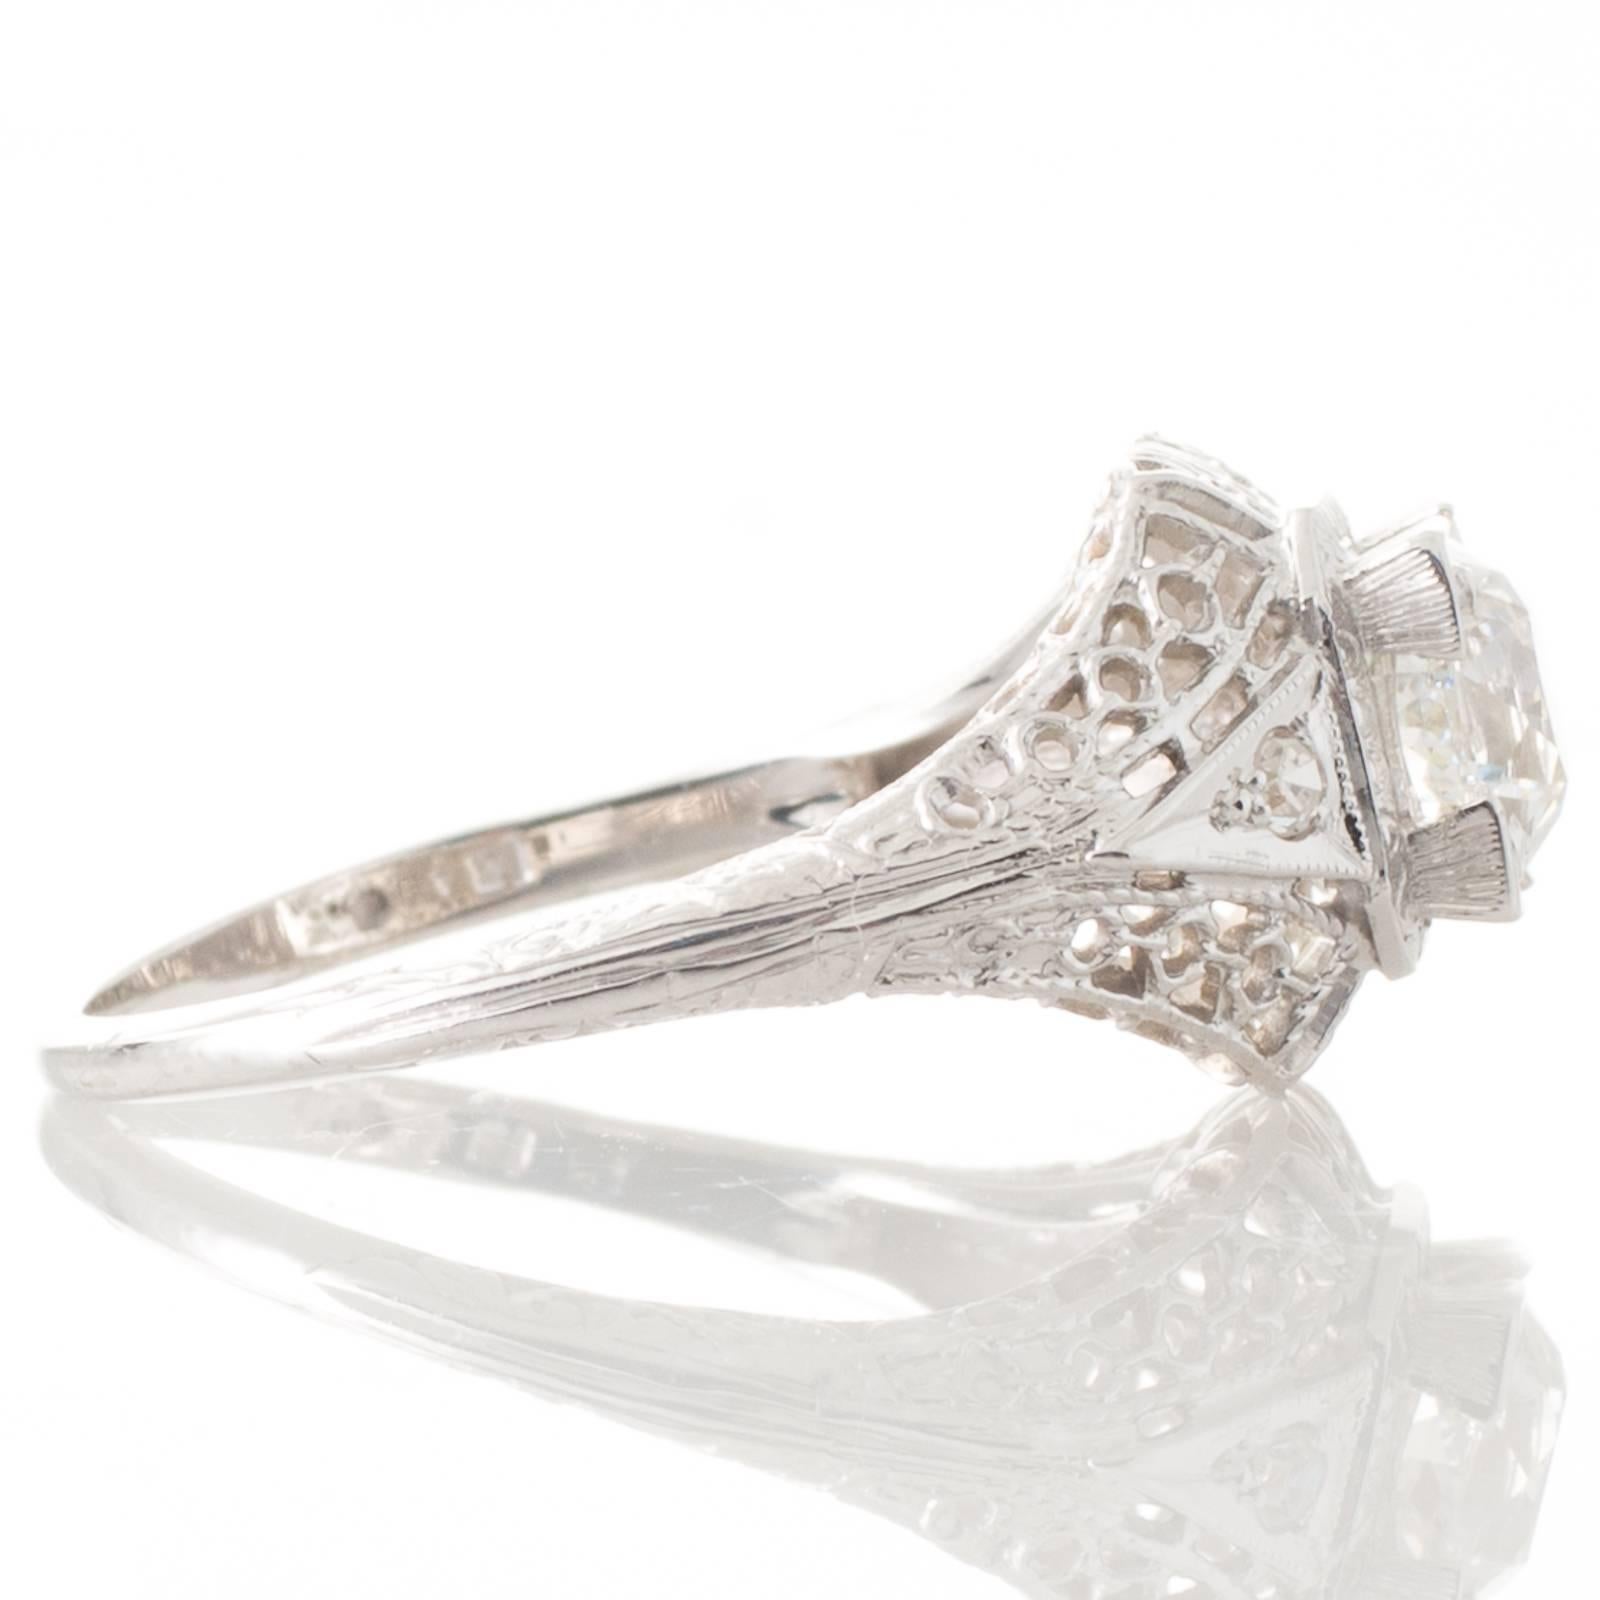 An 18ct white gold ring featuring a solitaire old European cut diamond of estimated weight 0.91ct, graded as colour I-J clarity VS2, bead set within a four corner claw box setting above a fine filigree detailed domed top mount and angled gallery